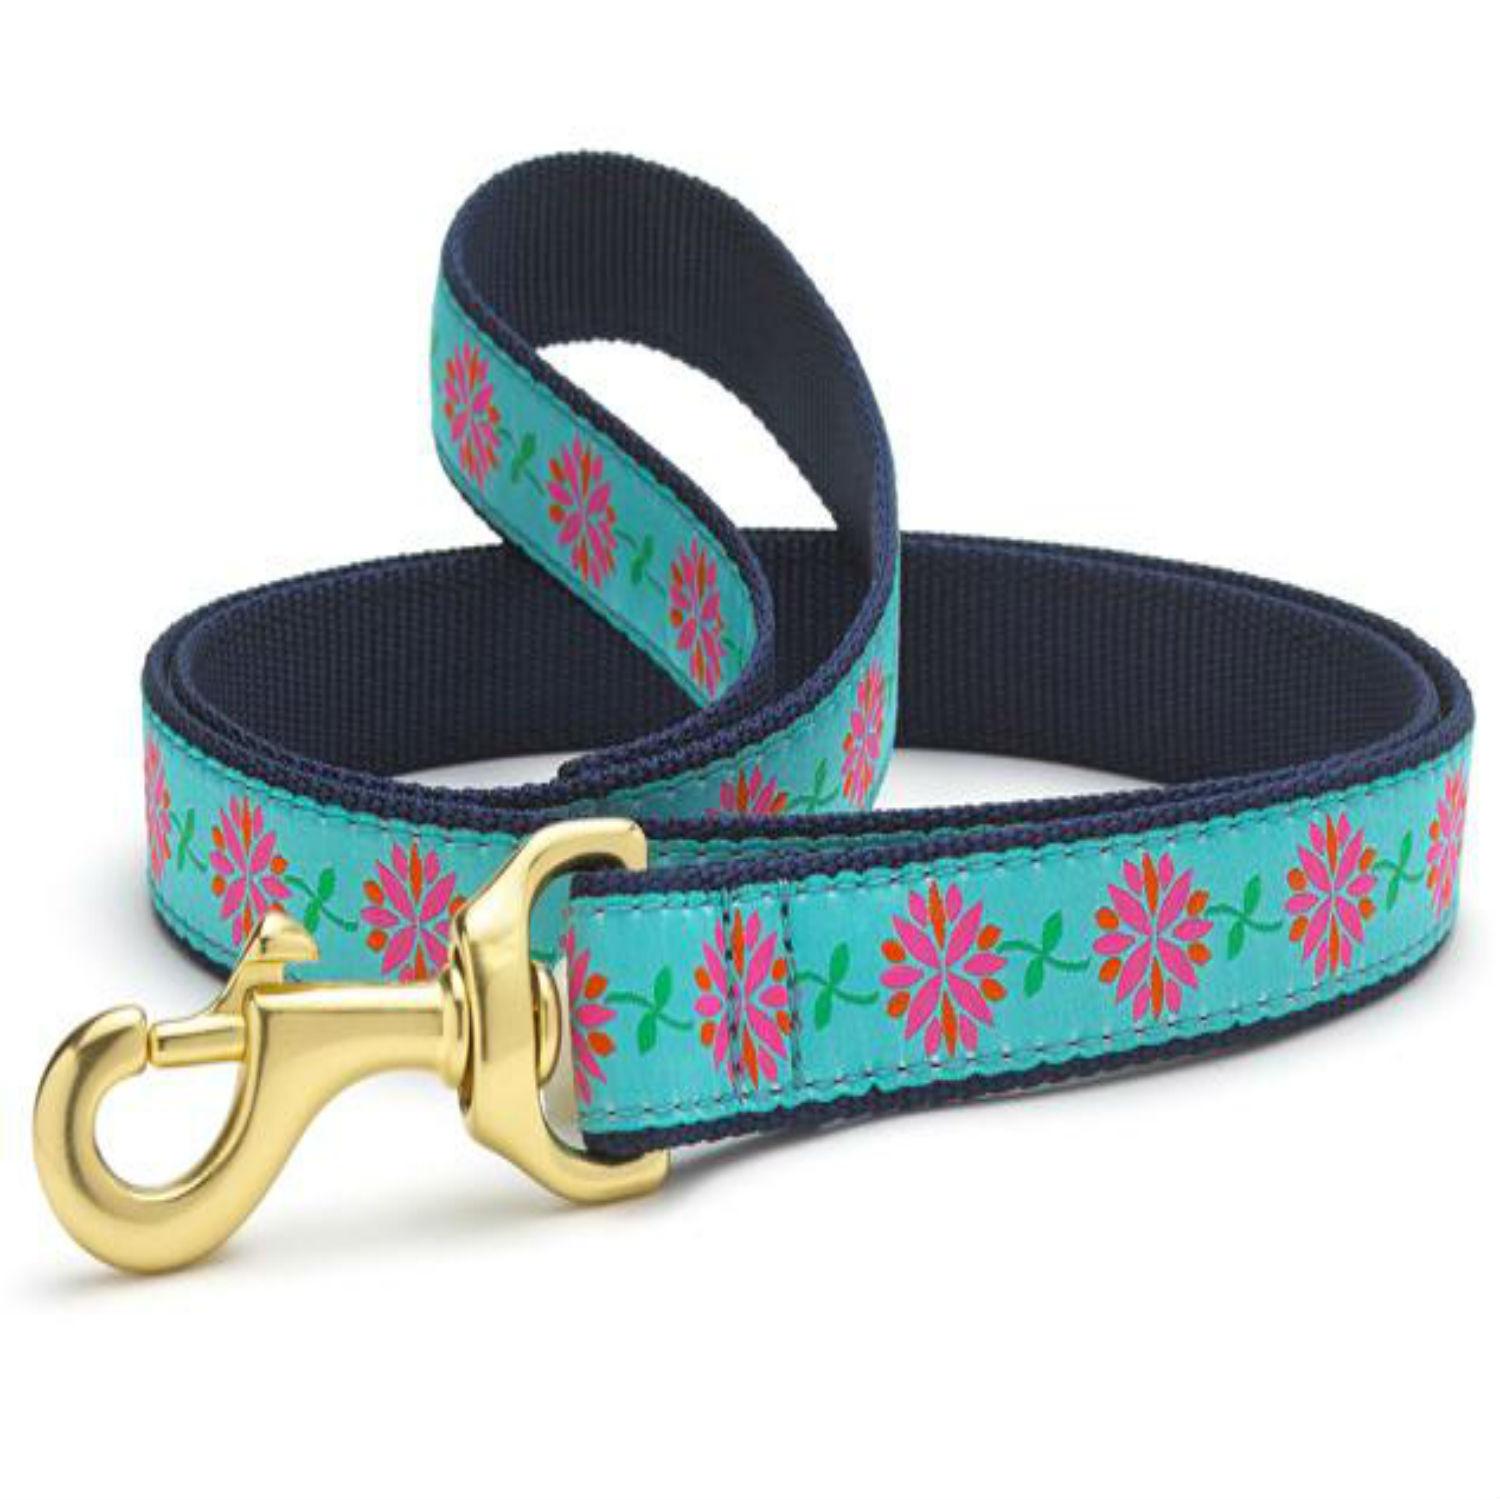 Dahlia Darling Dog Leash by Up Country